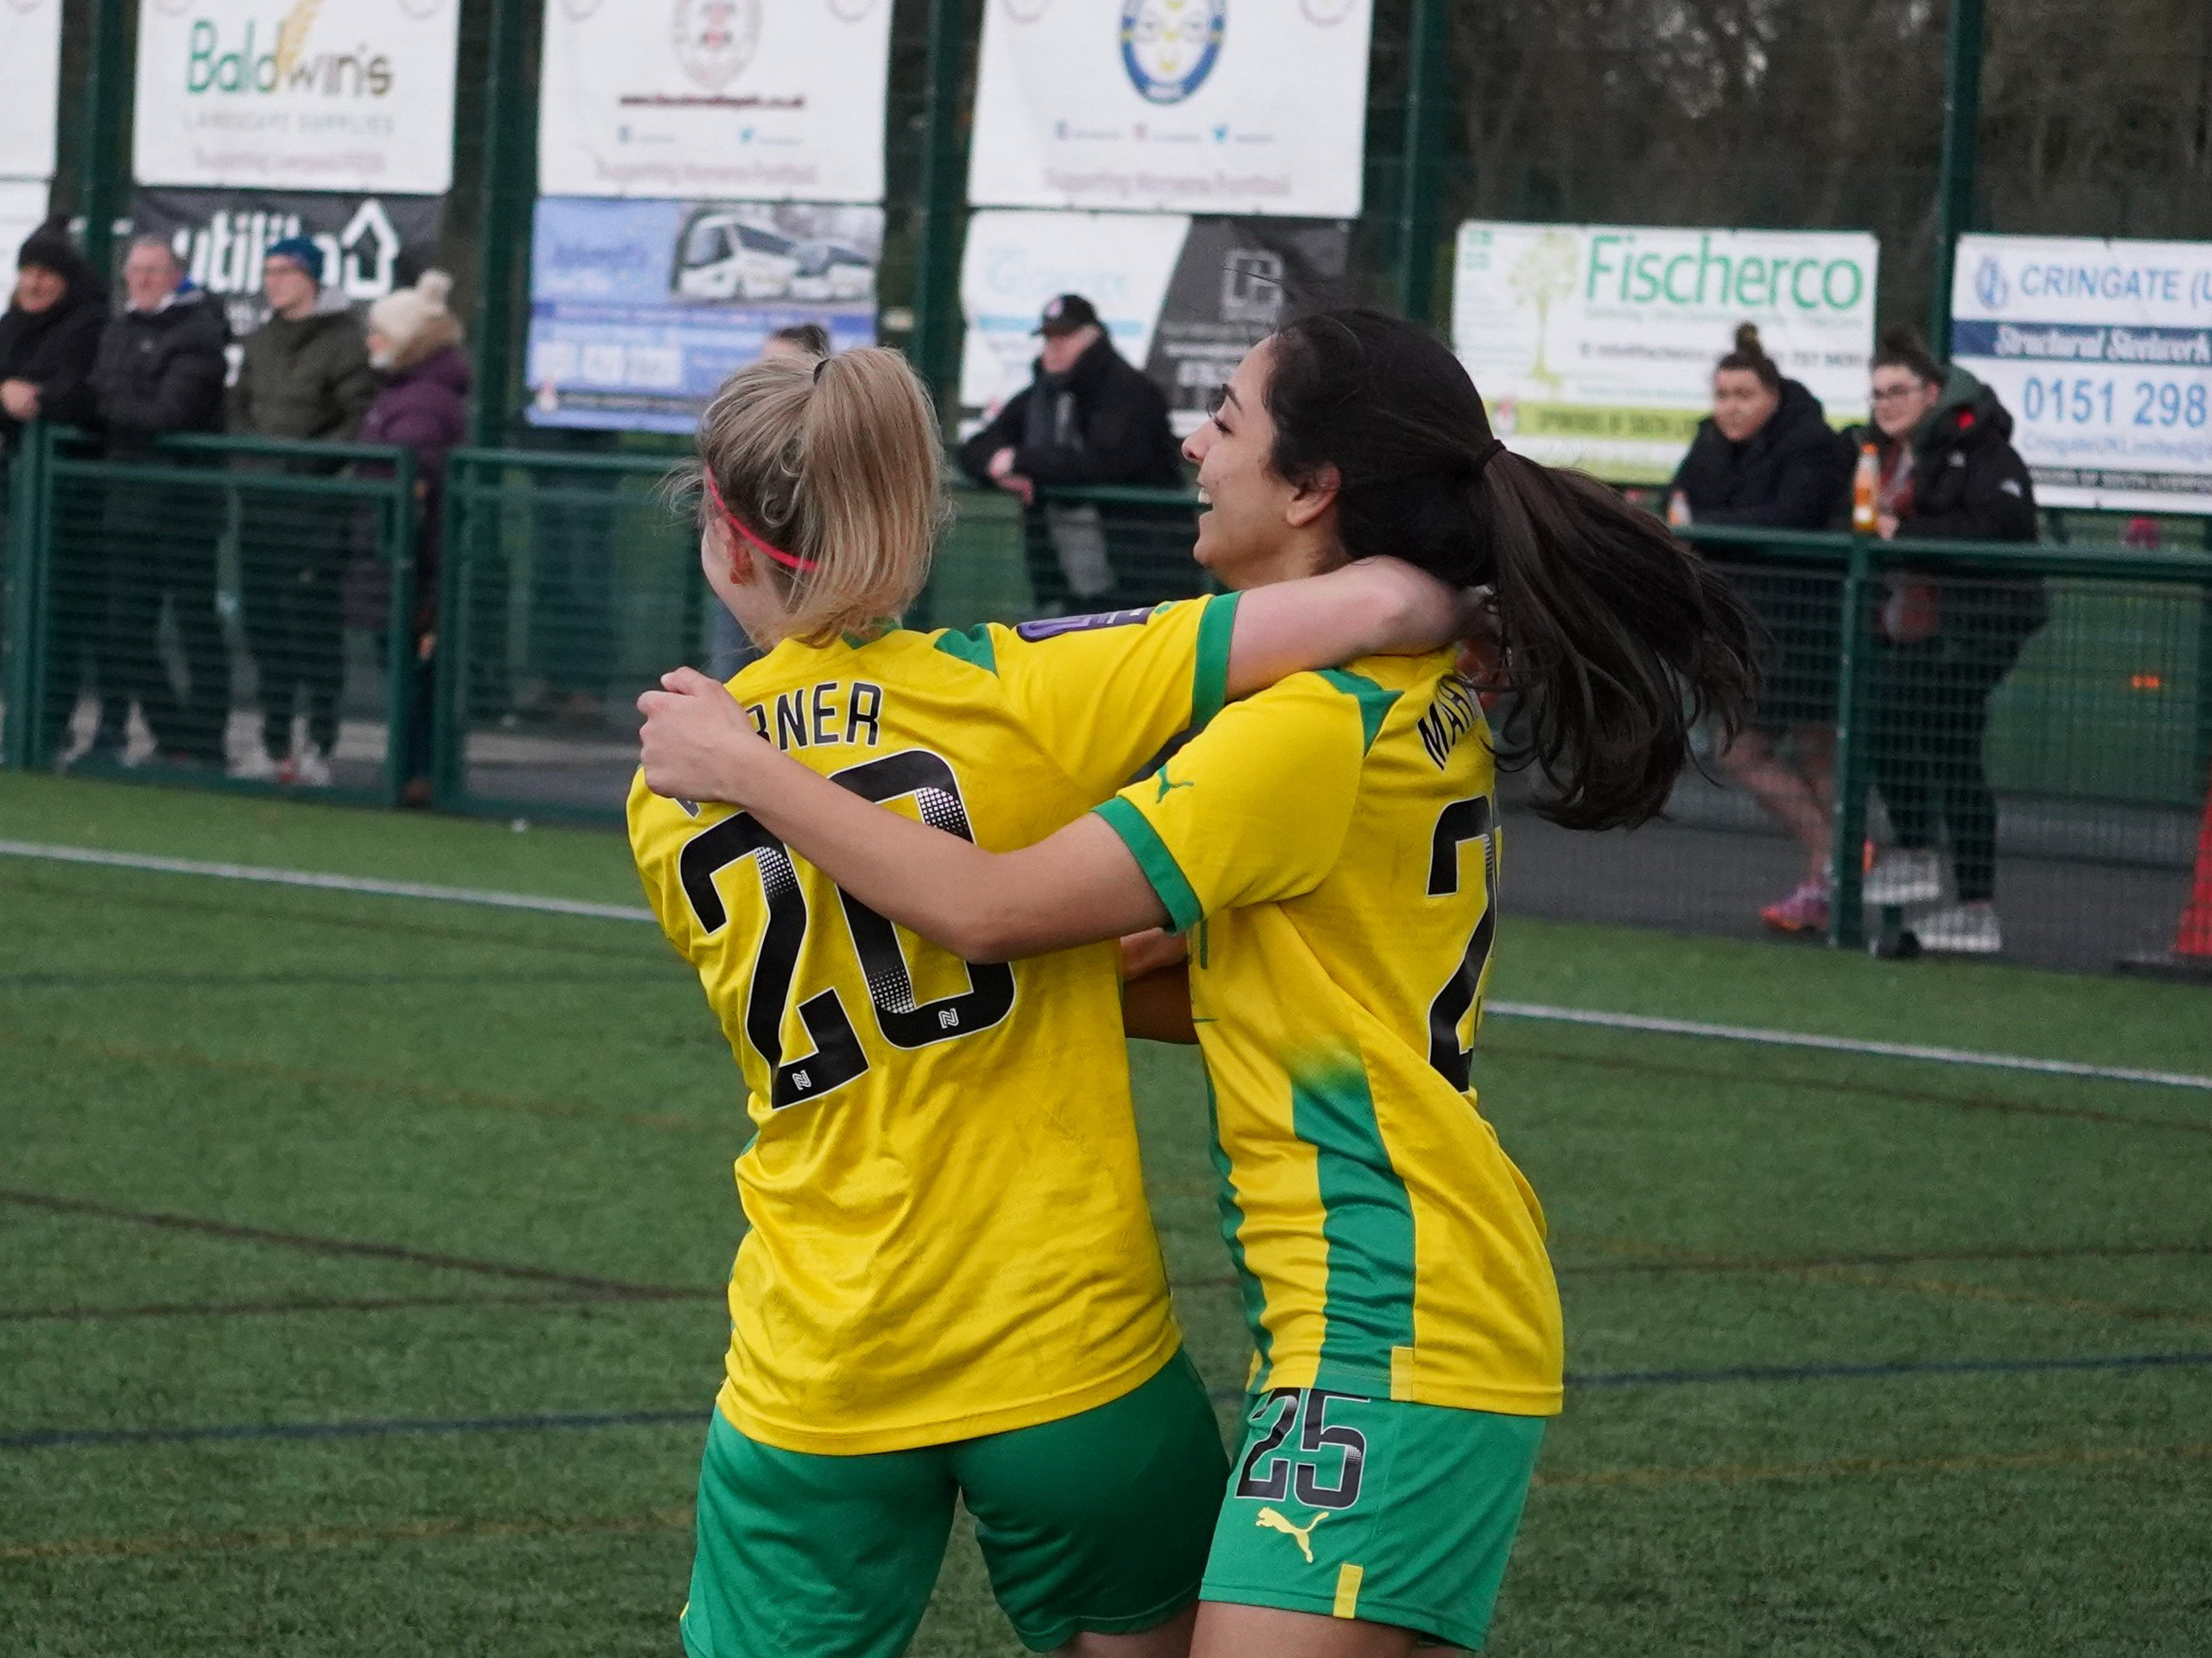 An image of Mariam Mahmood celebrating her goal against Liverpool Feds